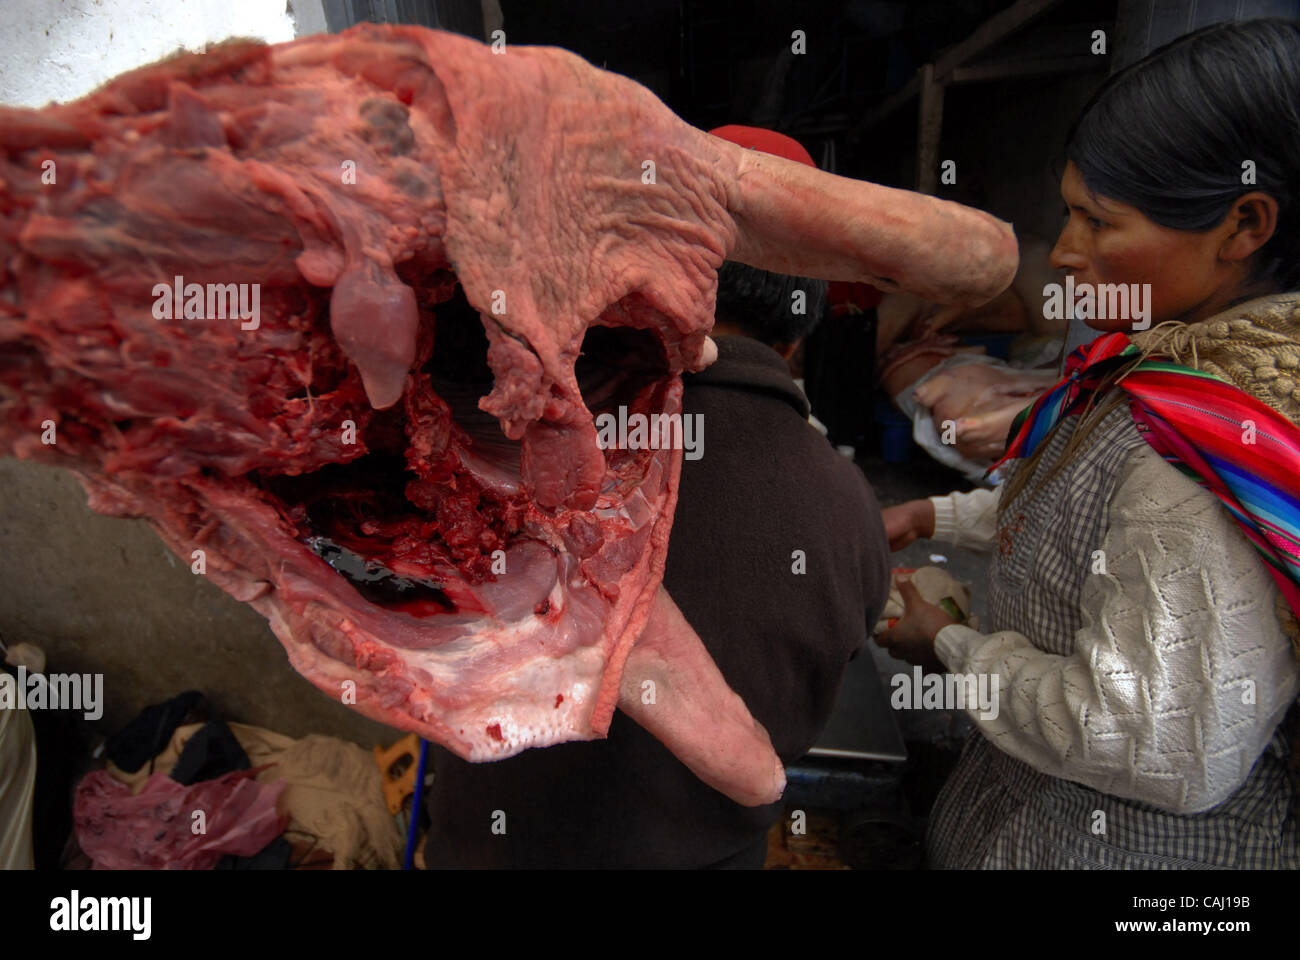 Dec 31, 2007 - La Paz, Bolivia - An inidgenous women looks at the pork meat she bought in La Paz Garita de Lima's street market. Every 31st December in La Paz, thousands of dead pigs are brought to the city to be sold, coming from Cochabamba, Santa Cruz and all La Paz areas. The bolivian tradition t Stock Photo